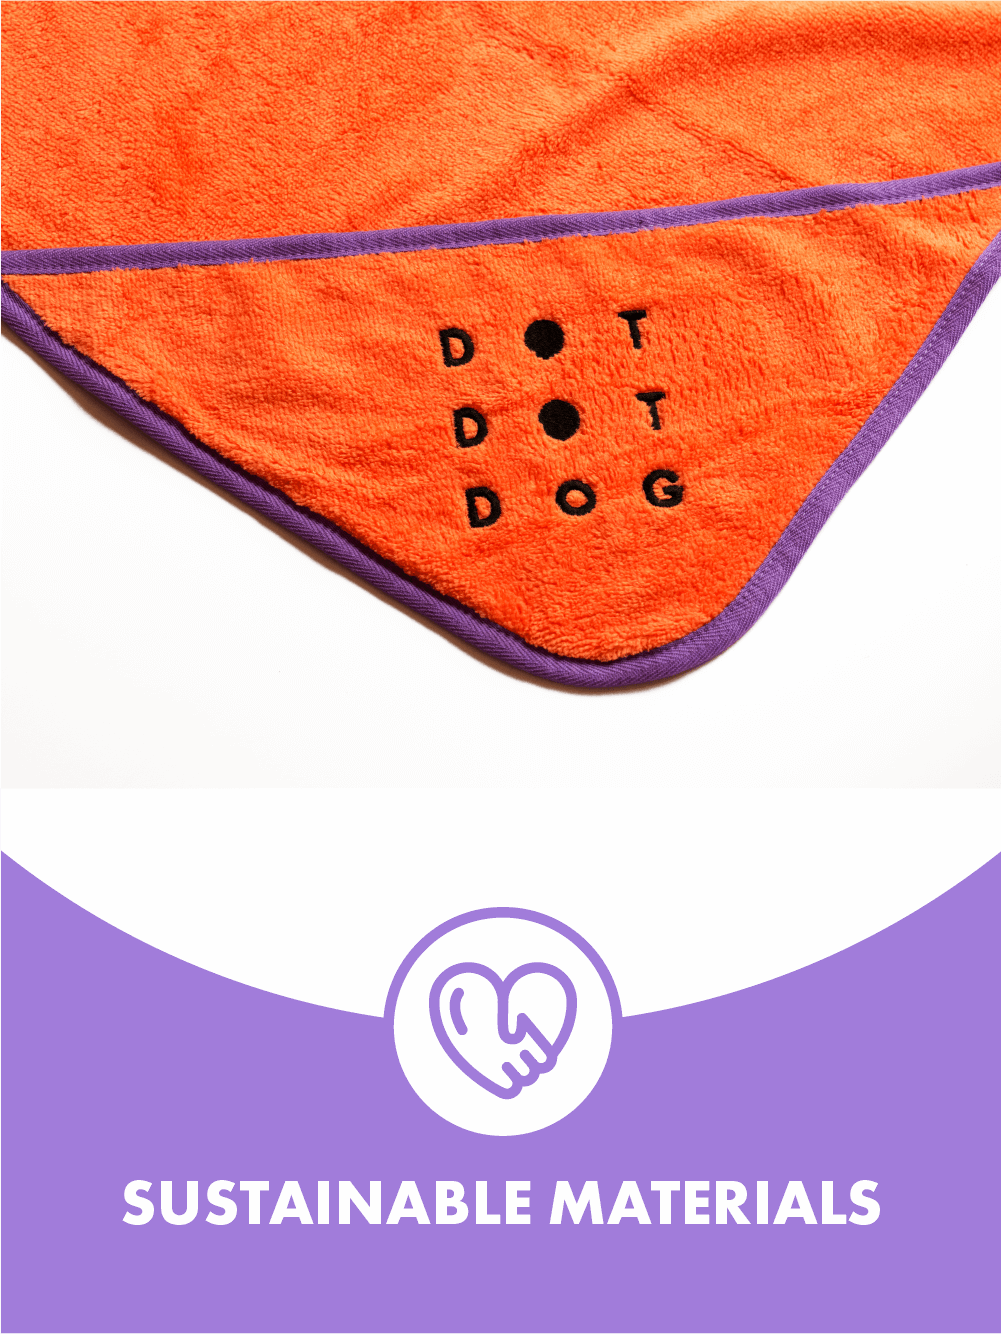 Bamboo dog towel large - text says sustainable materials